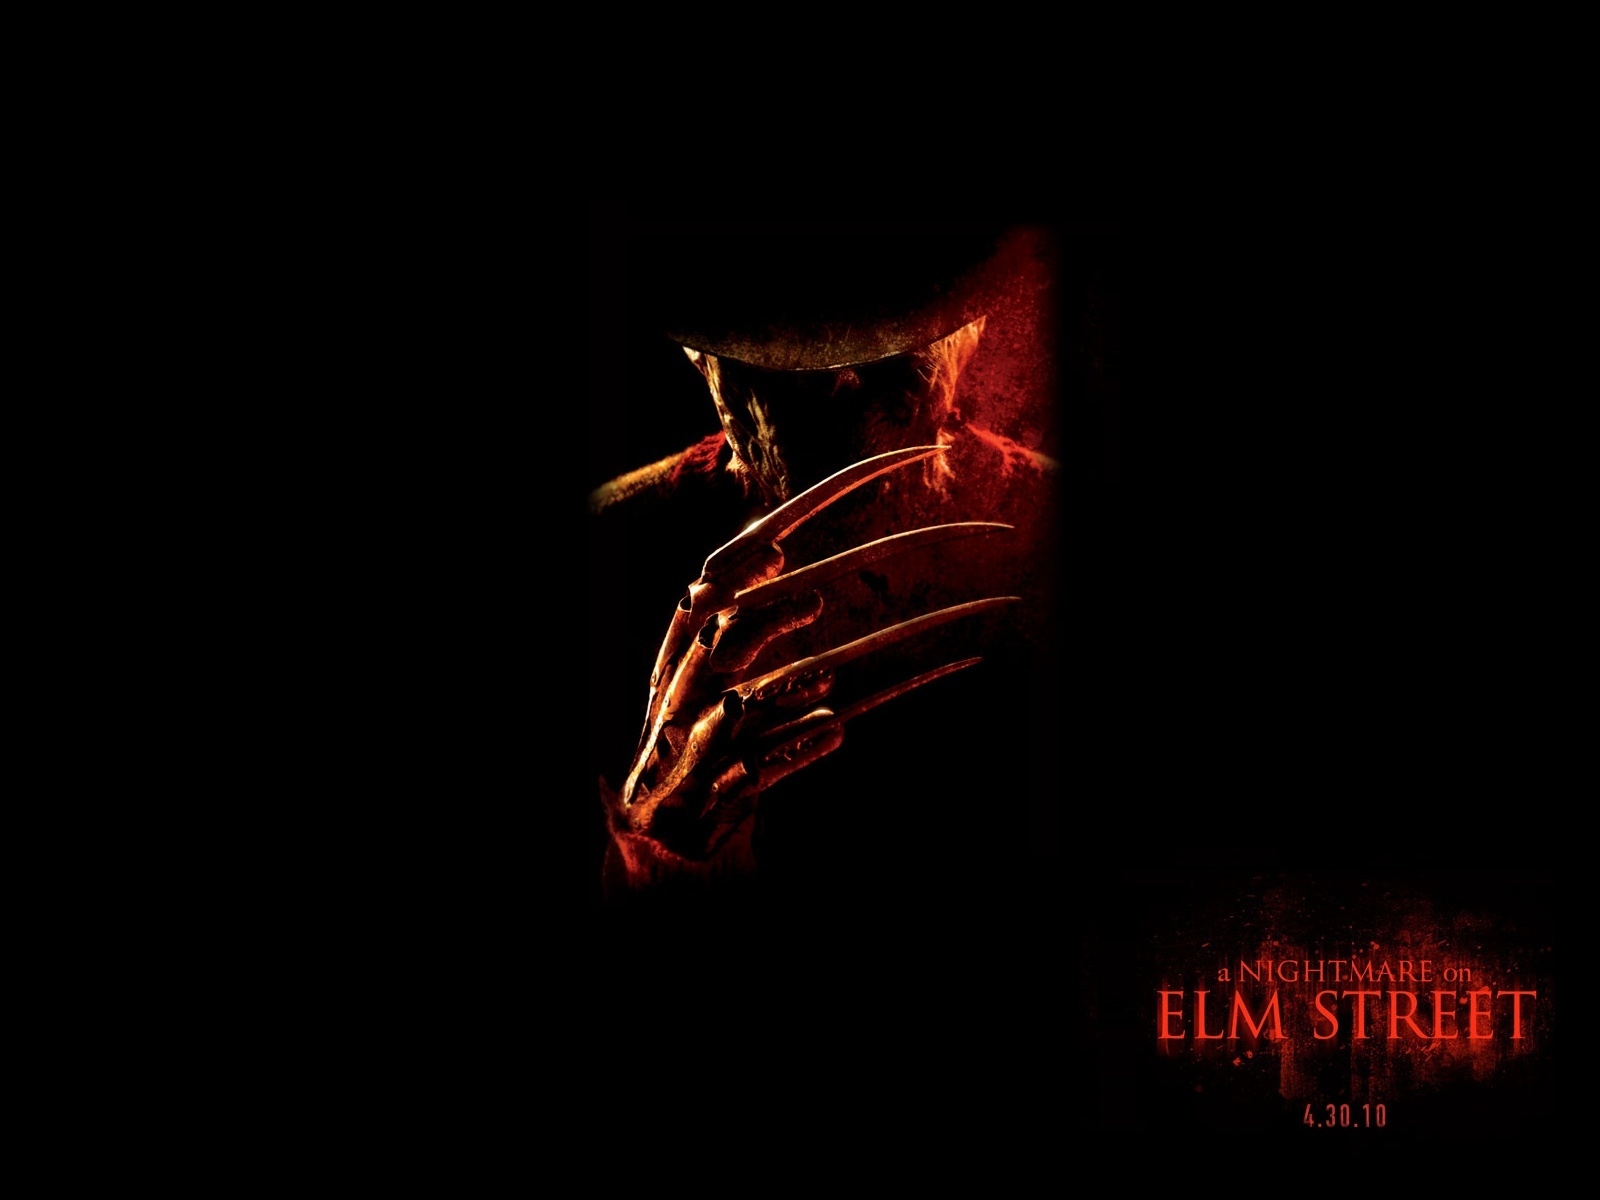 A Nightmare on Elm Street 2010 for 1600 x 1200 resolution